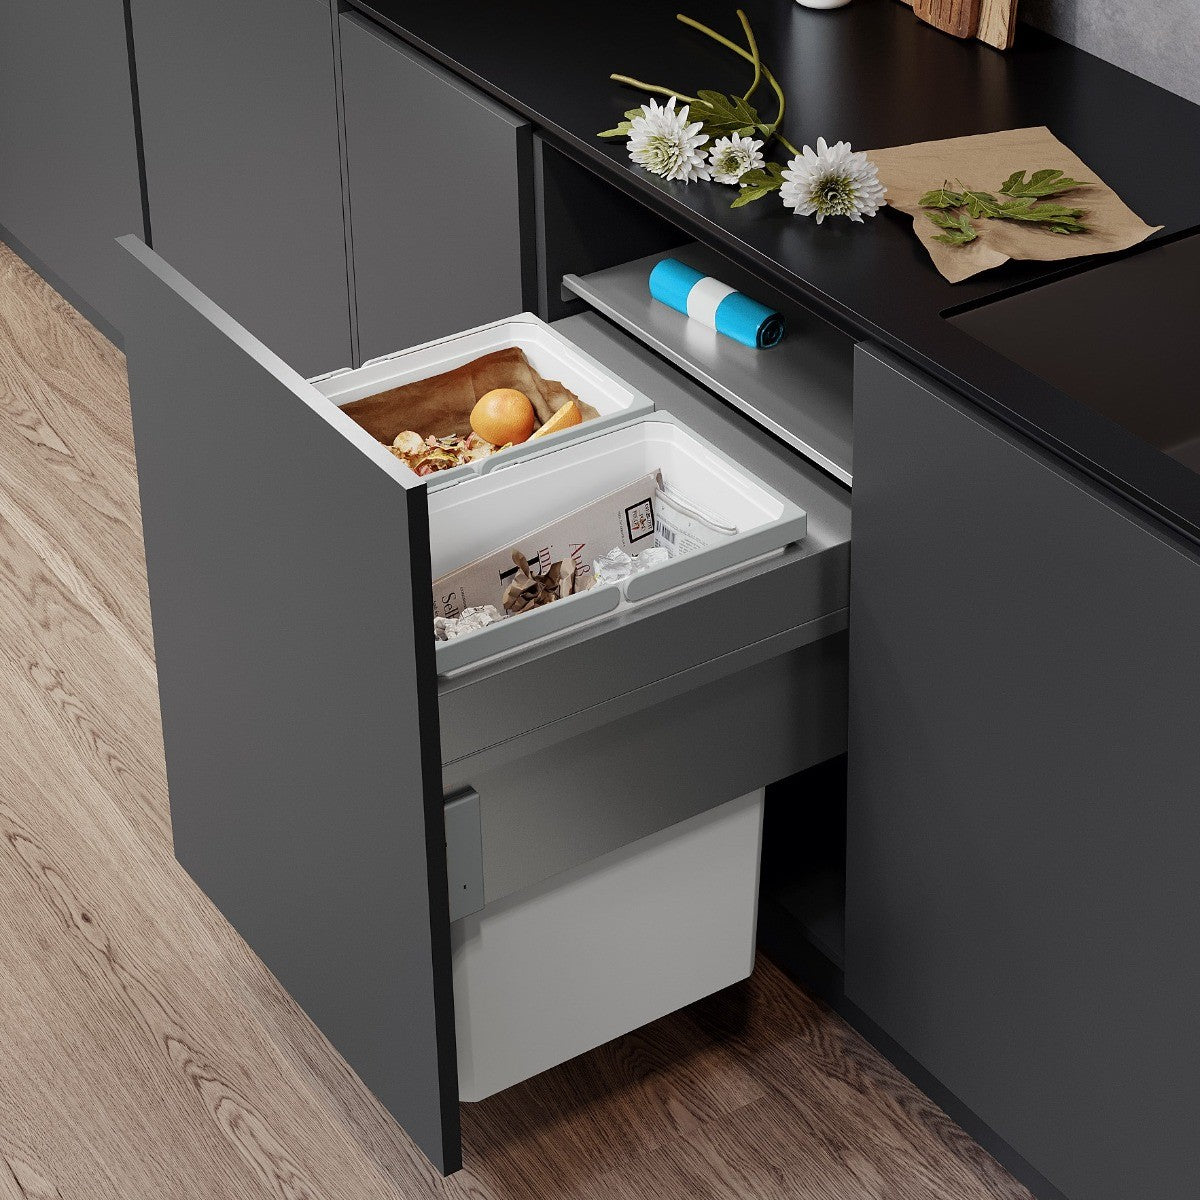 Two compartment Vauth-Sagel integrated kitchen bin, in silver grey colourway, for waste segregation